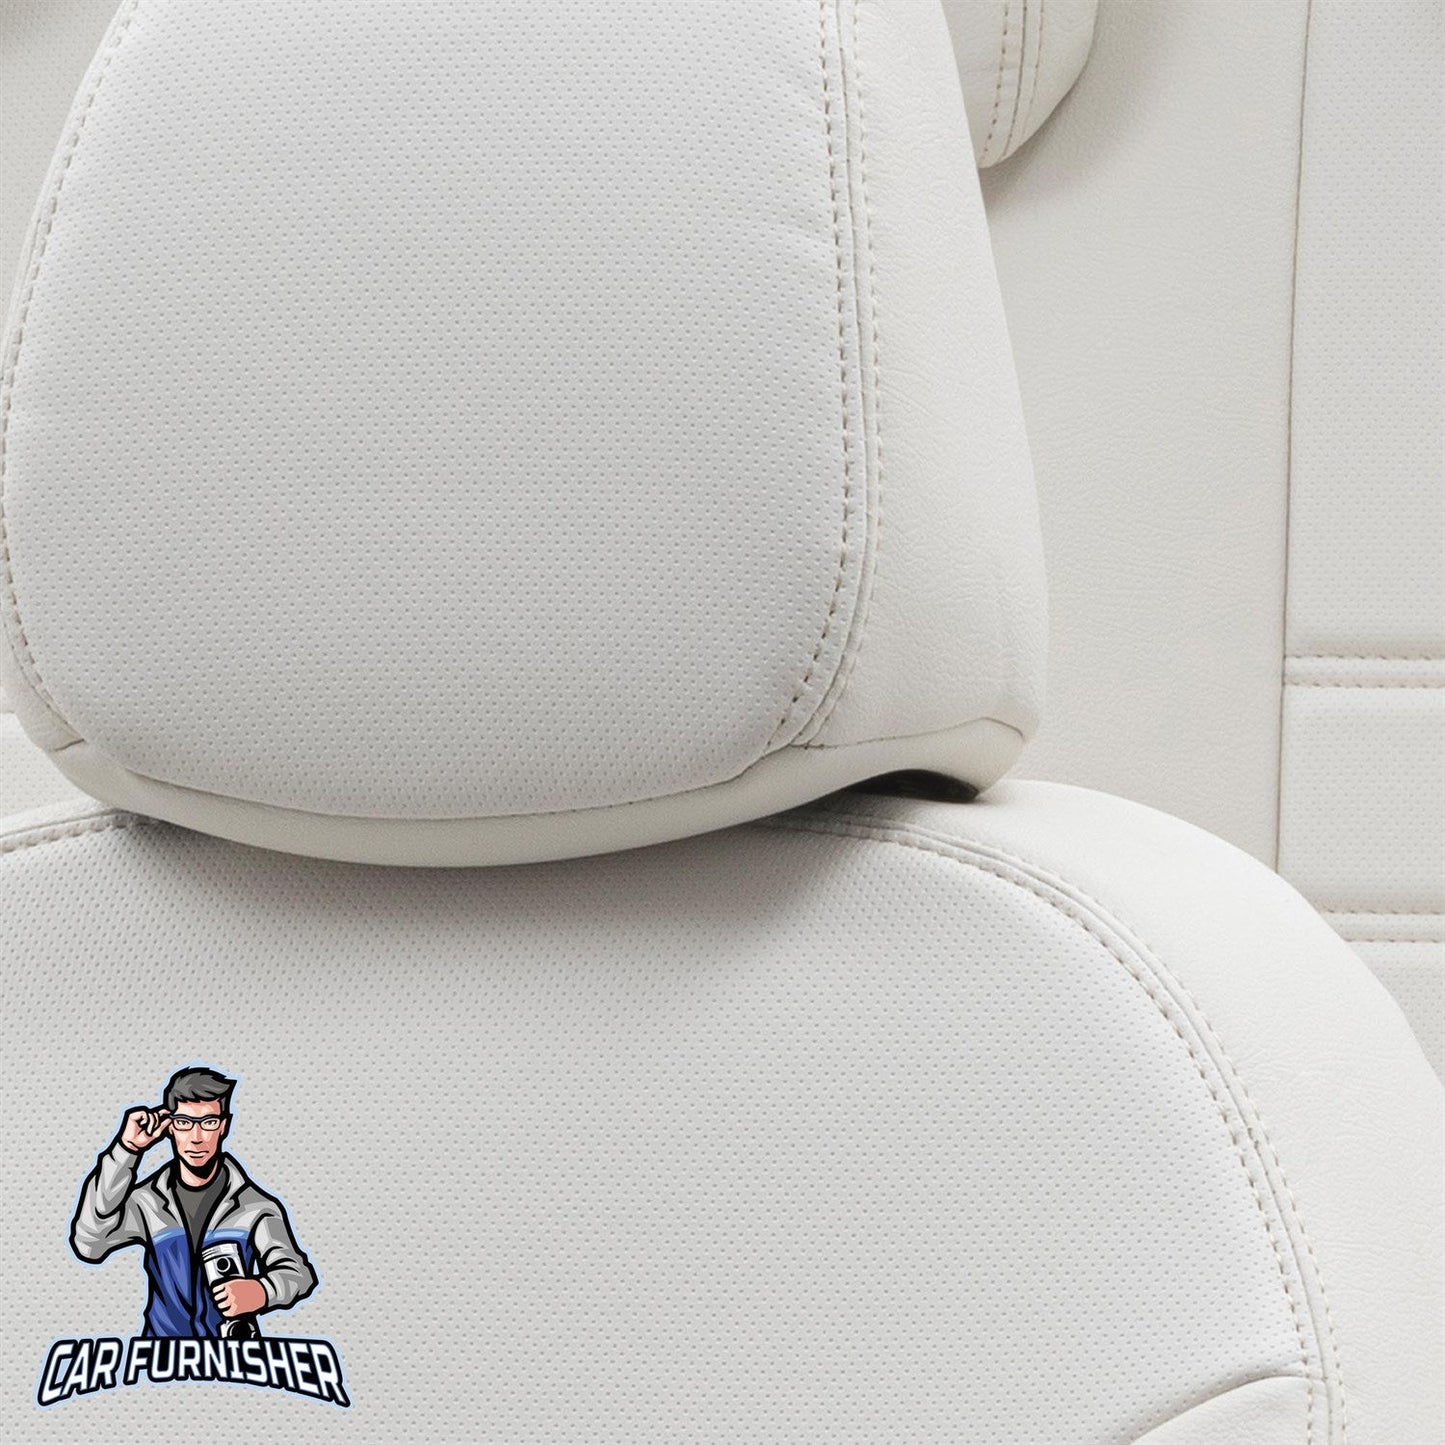 Iveco Daily Seat Covers Istanbul Leather Design Ivory Leather